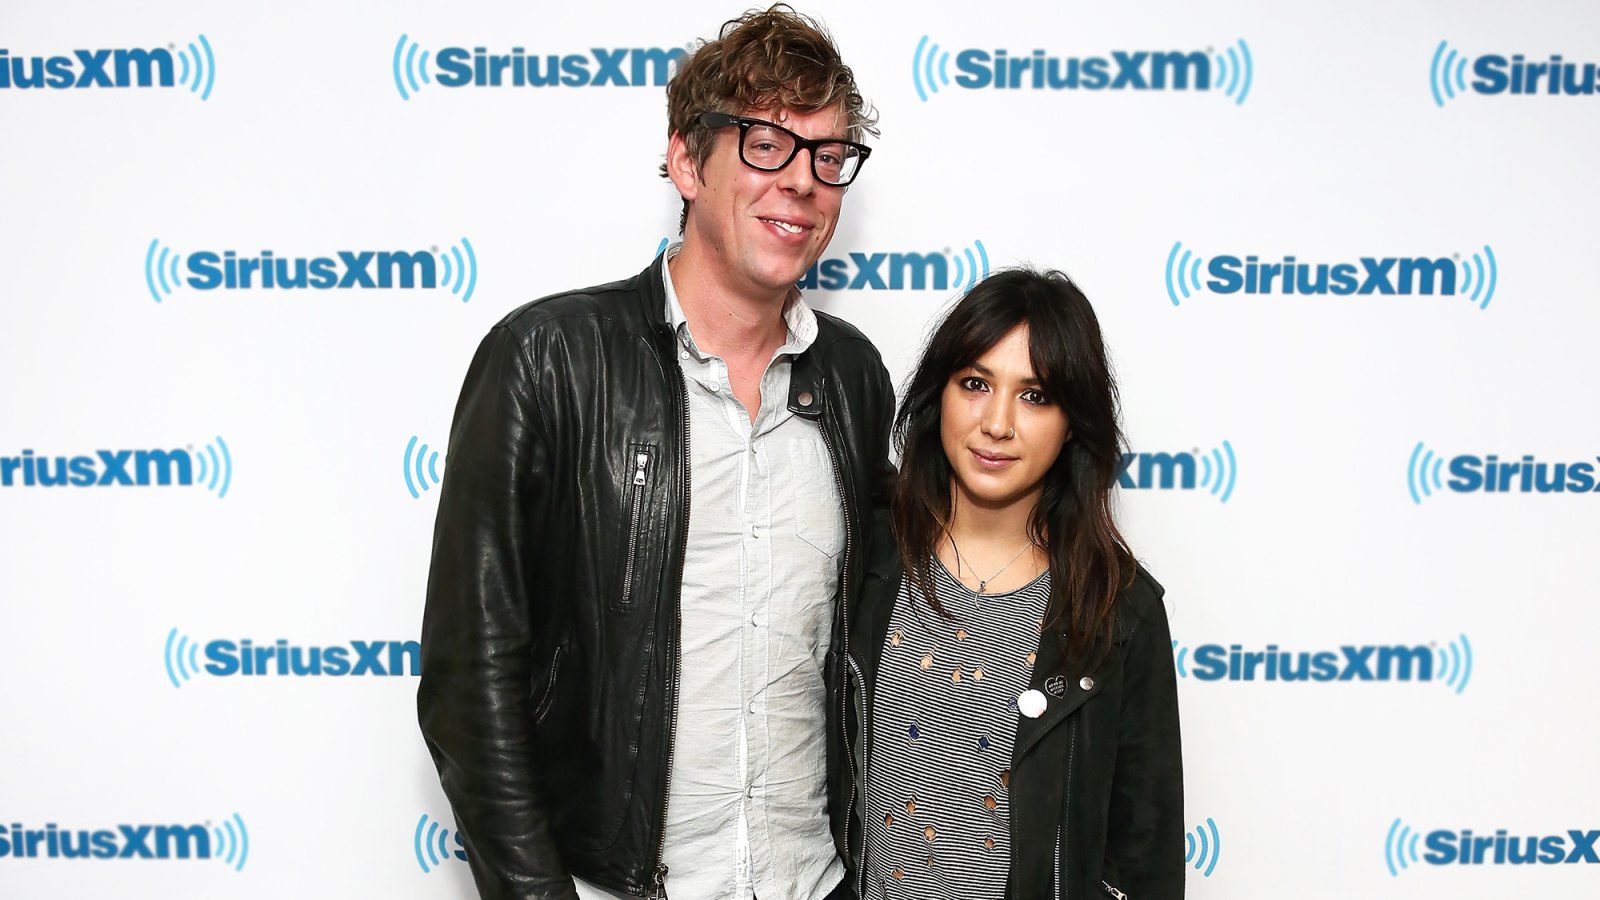 Patrick Carney and Michelle Branch